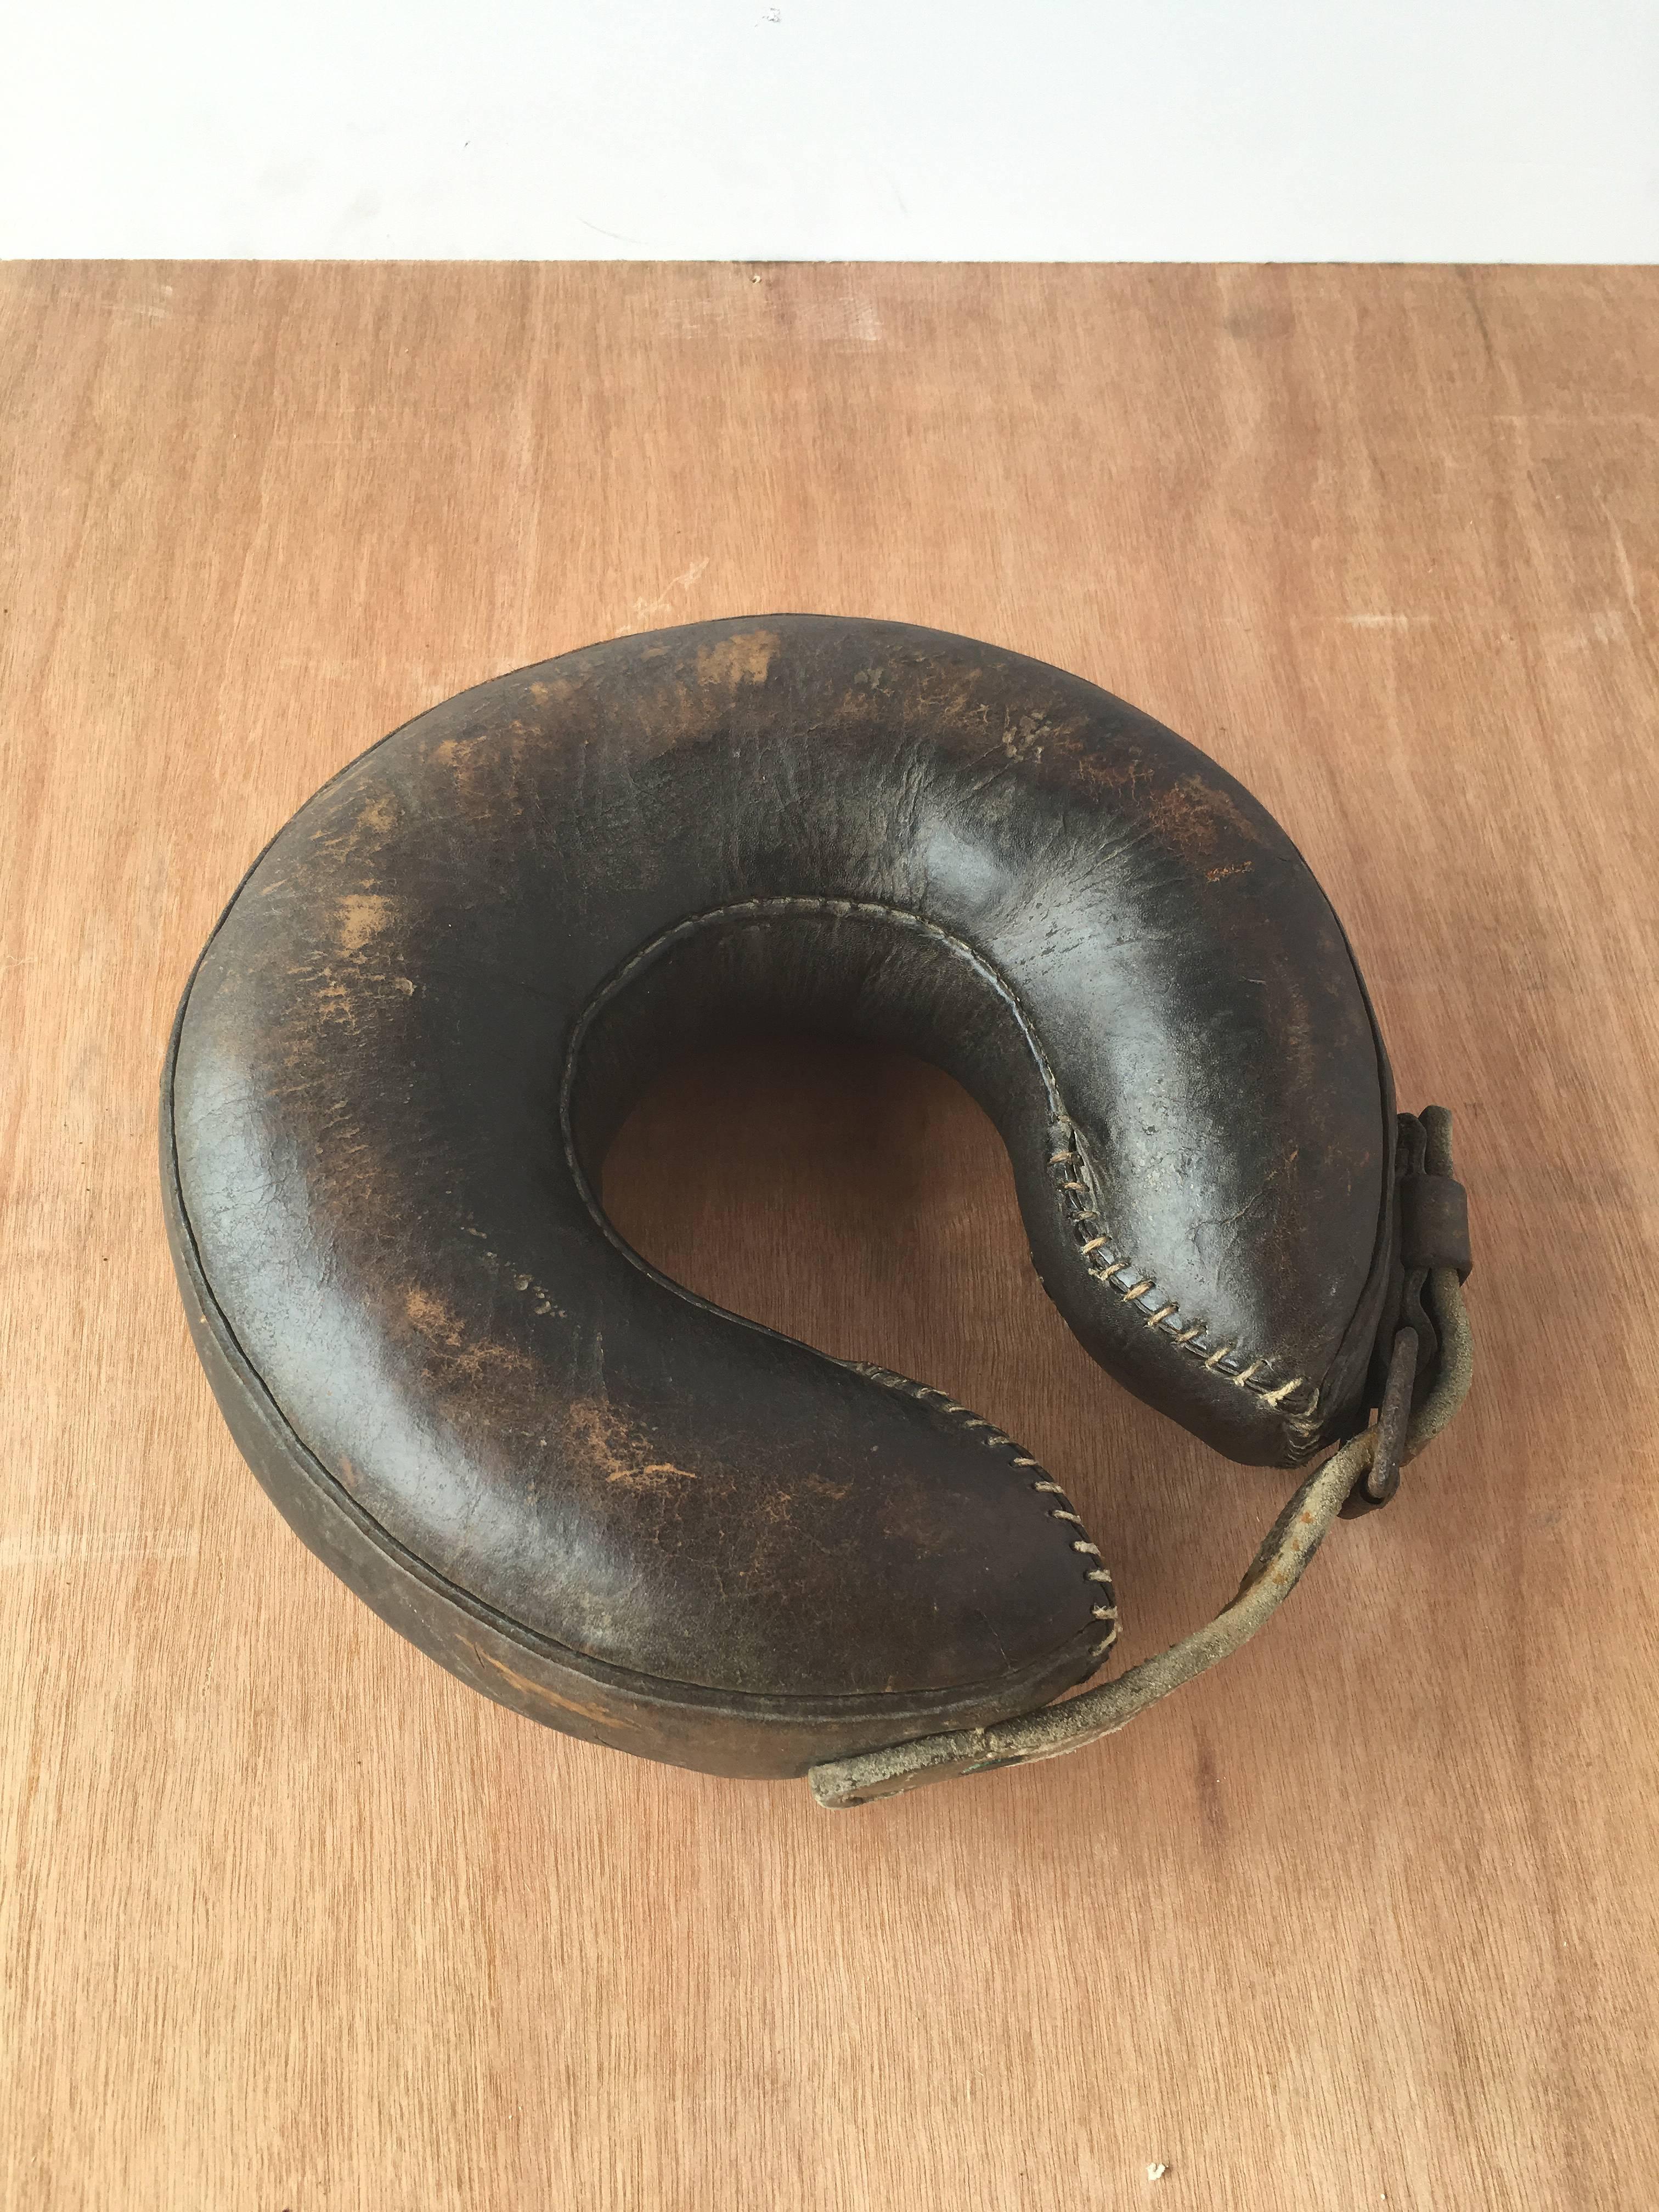 English vintage leather shoe boil boot from the late 18th century. Shoe boil boots are used to protect horses from developing sores on their elbows when they lie down. For decorative use. Vintage patina with minor wear consistent with age and use.
